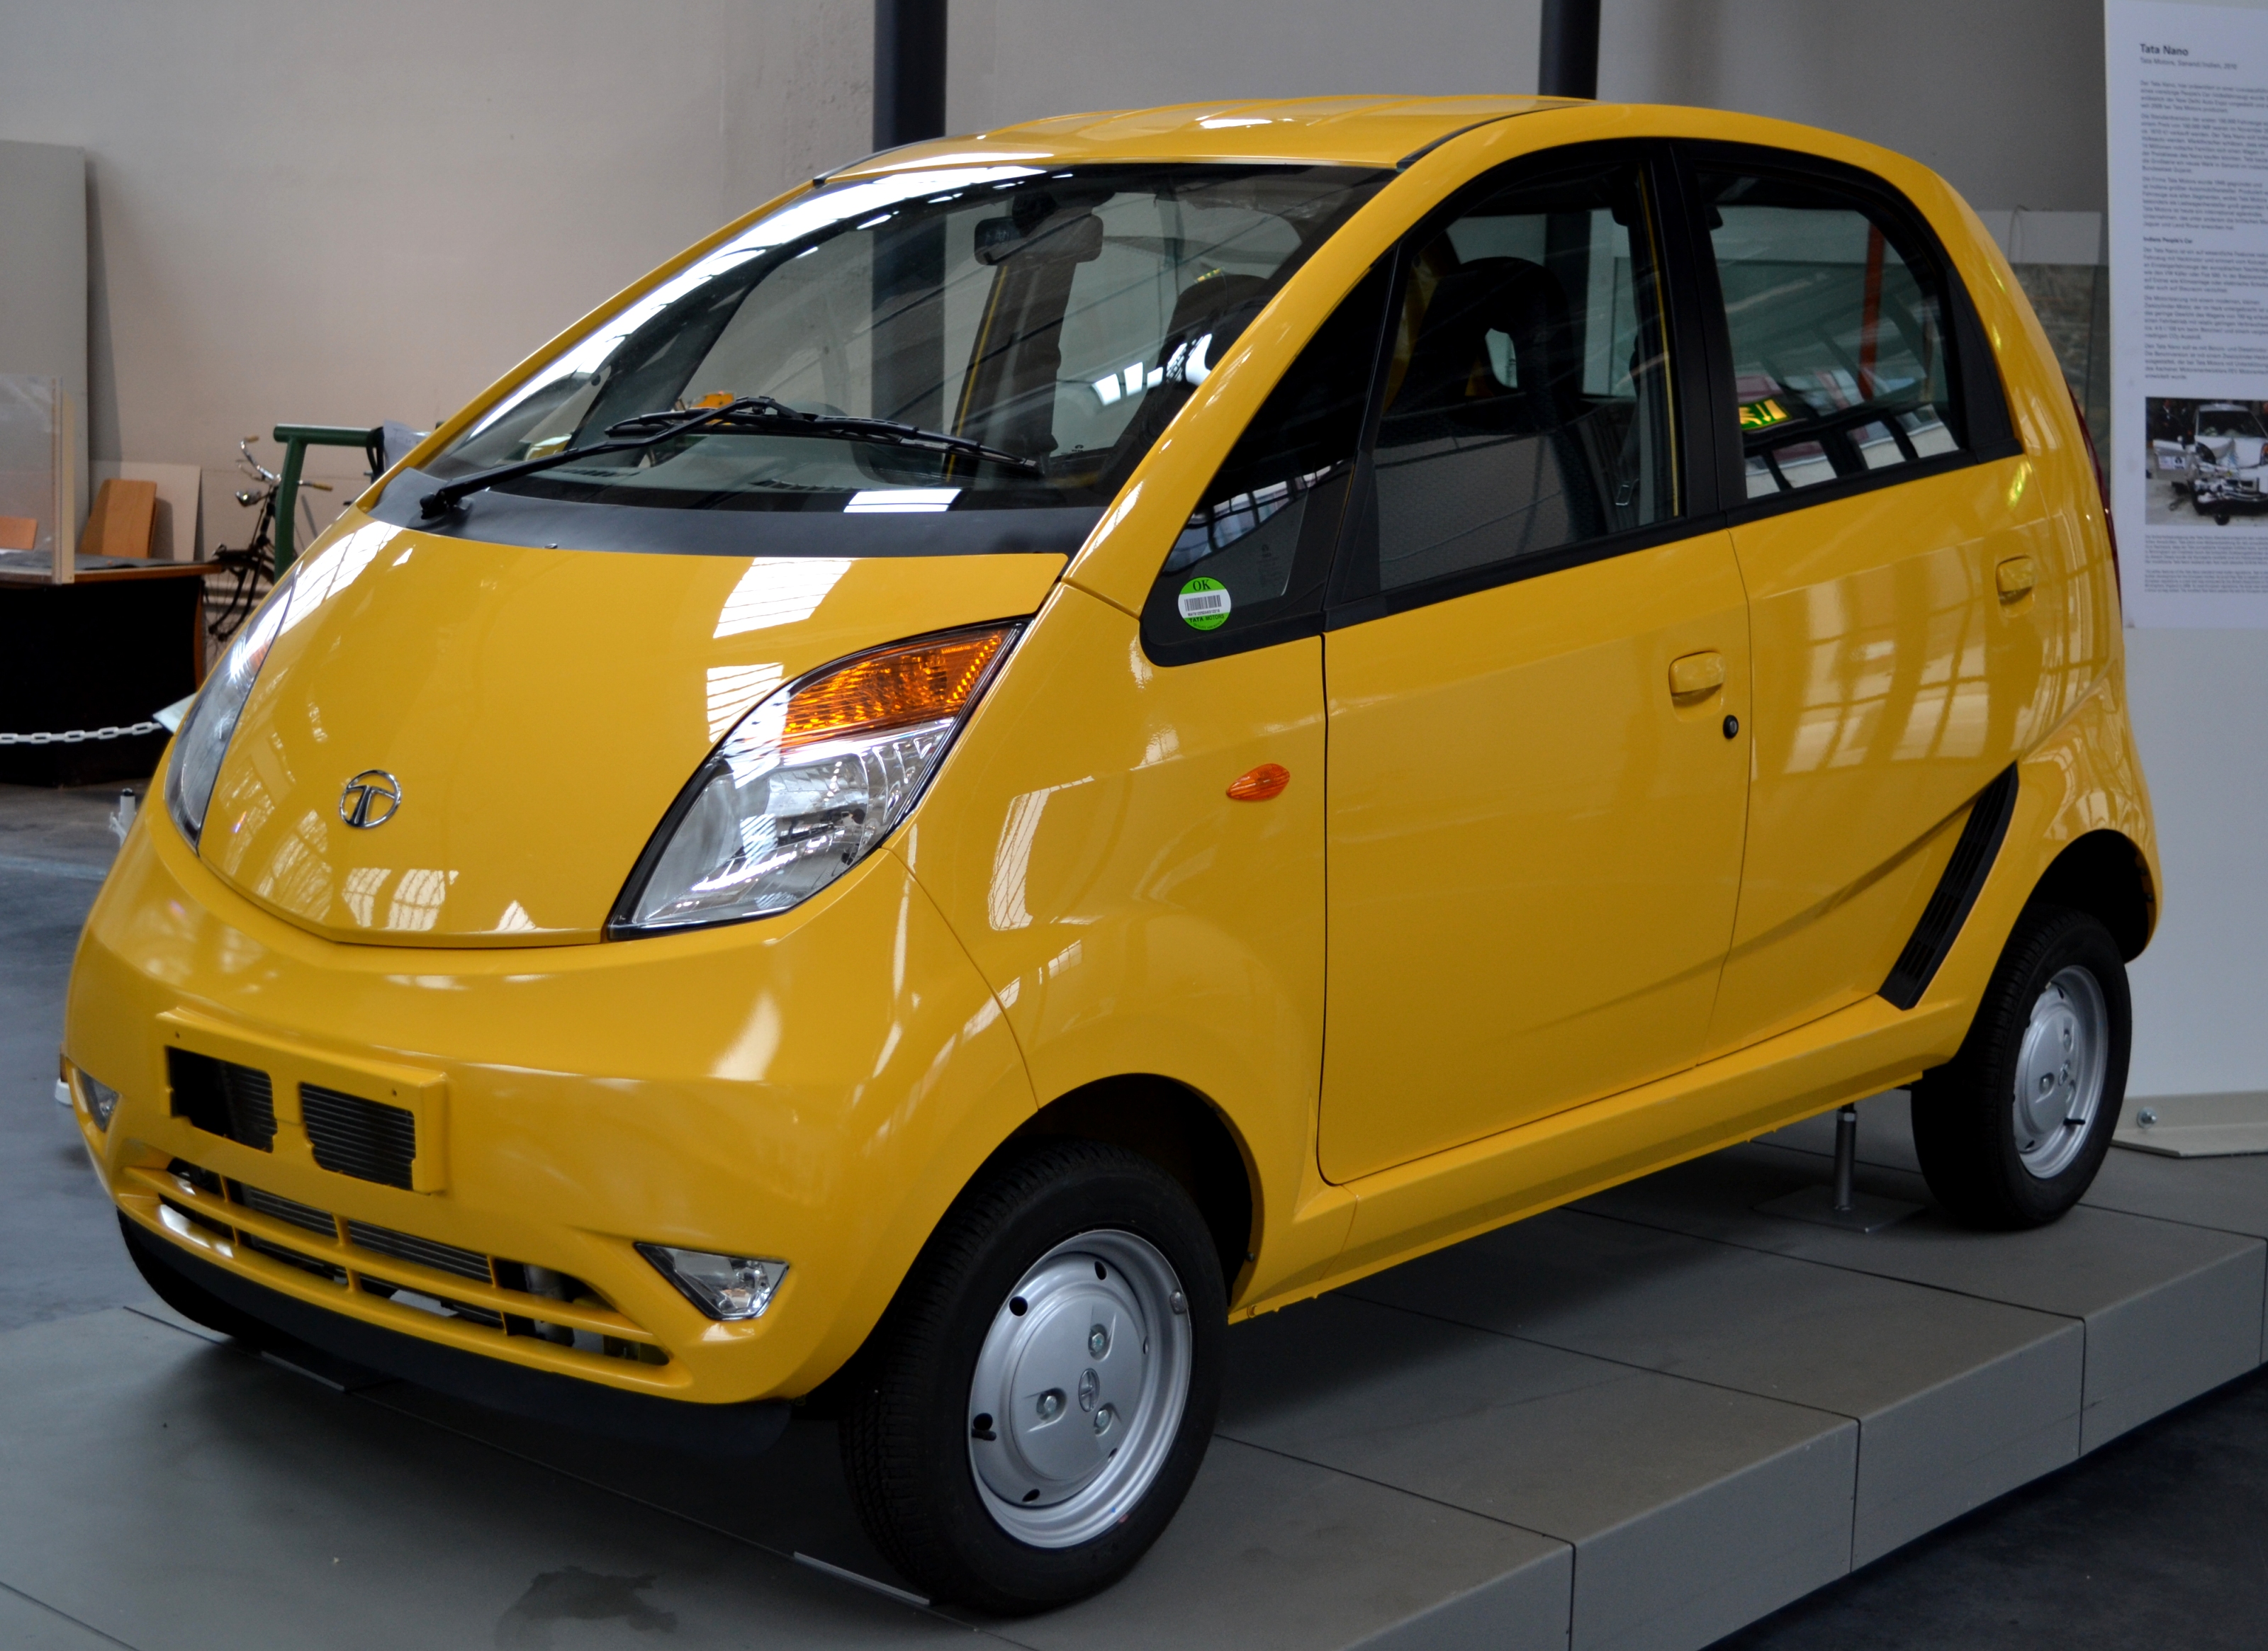 No Tata Nano production in first 9 months of 2019, just 1 unit sold 
